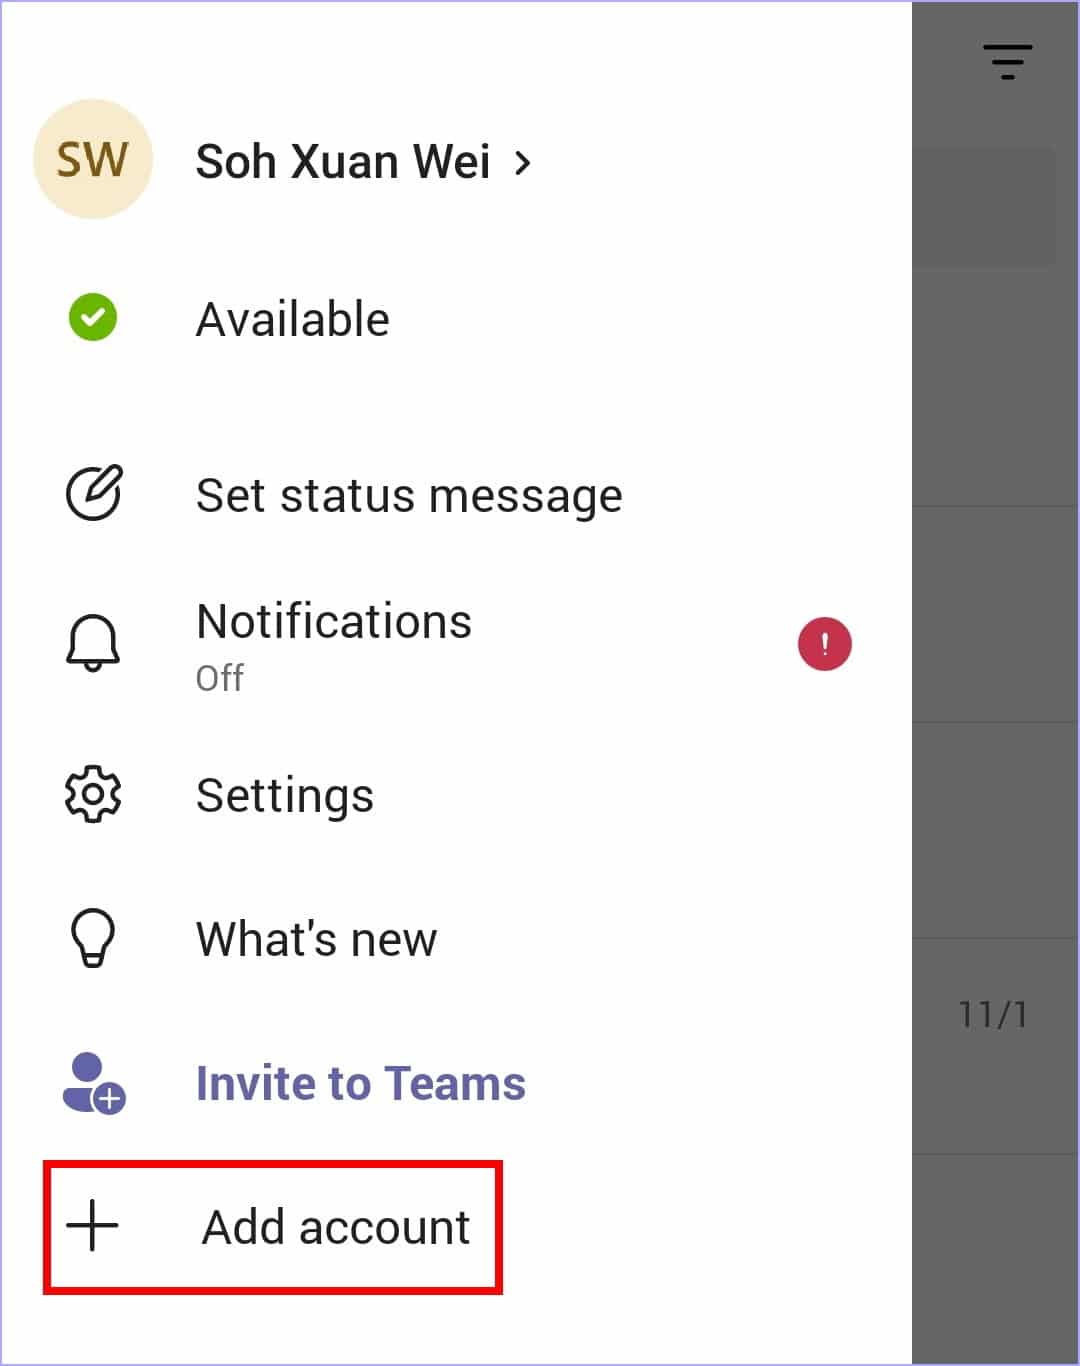 re-sign in to Microsoft Teams app by adding account to fix mobile notifications not working or showing on iOS or Android